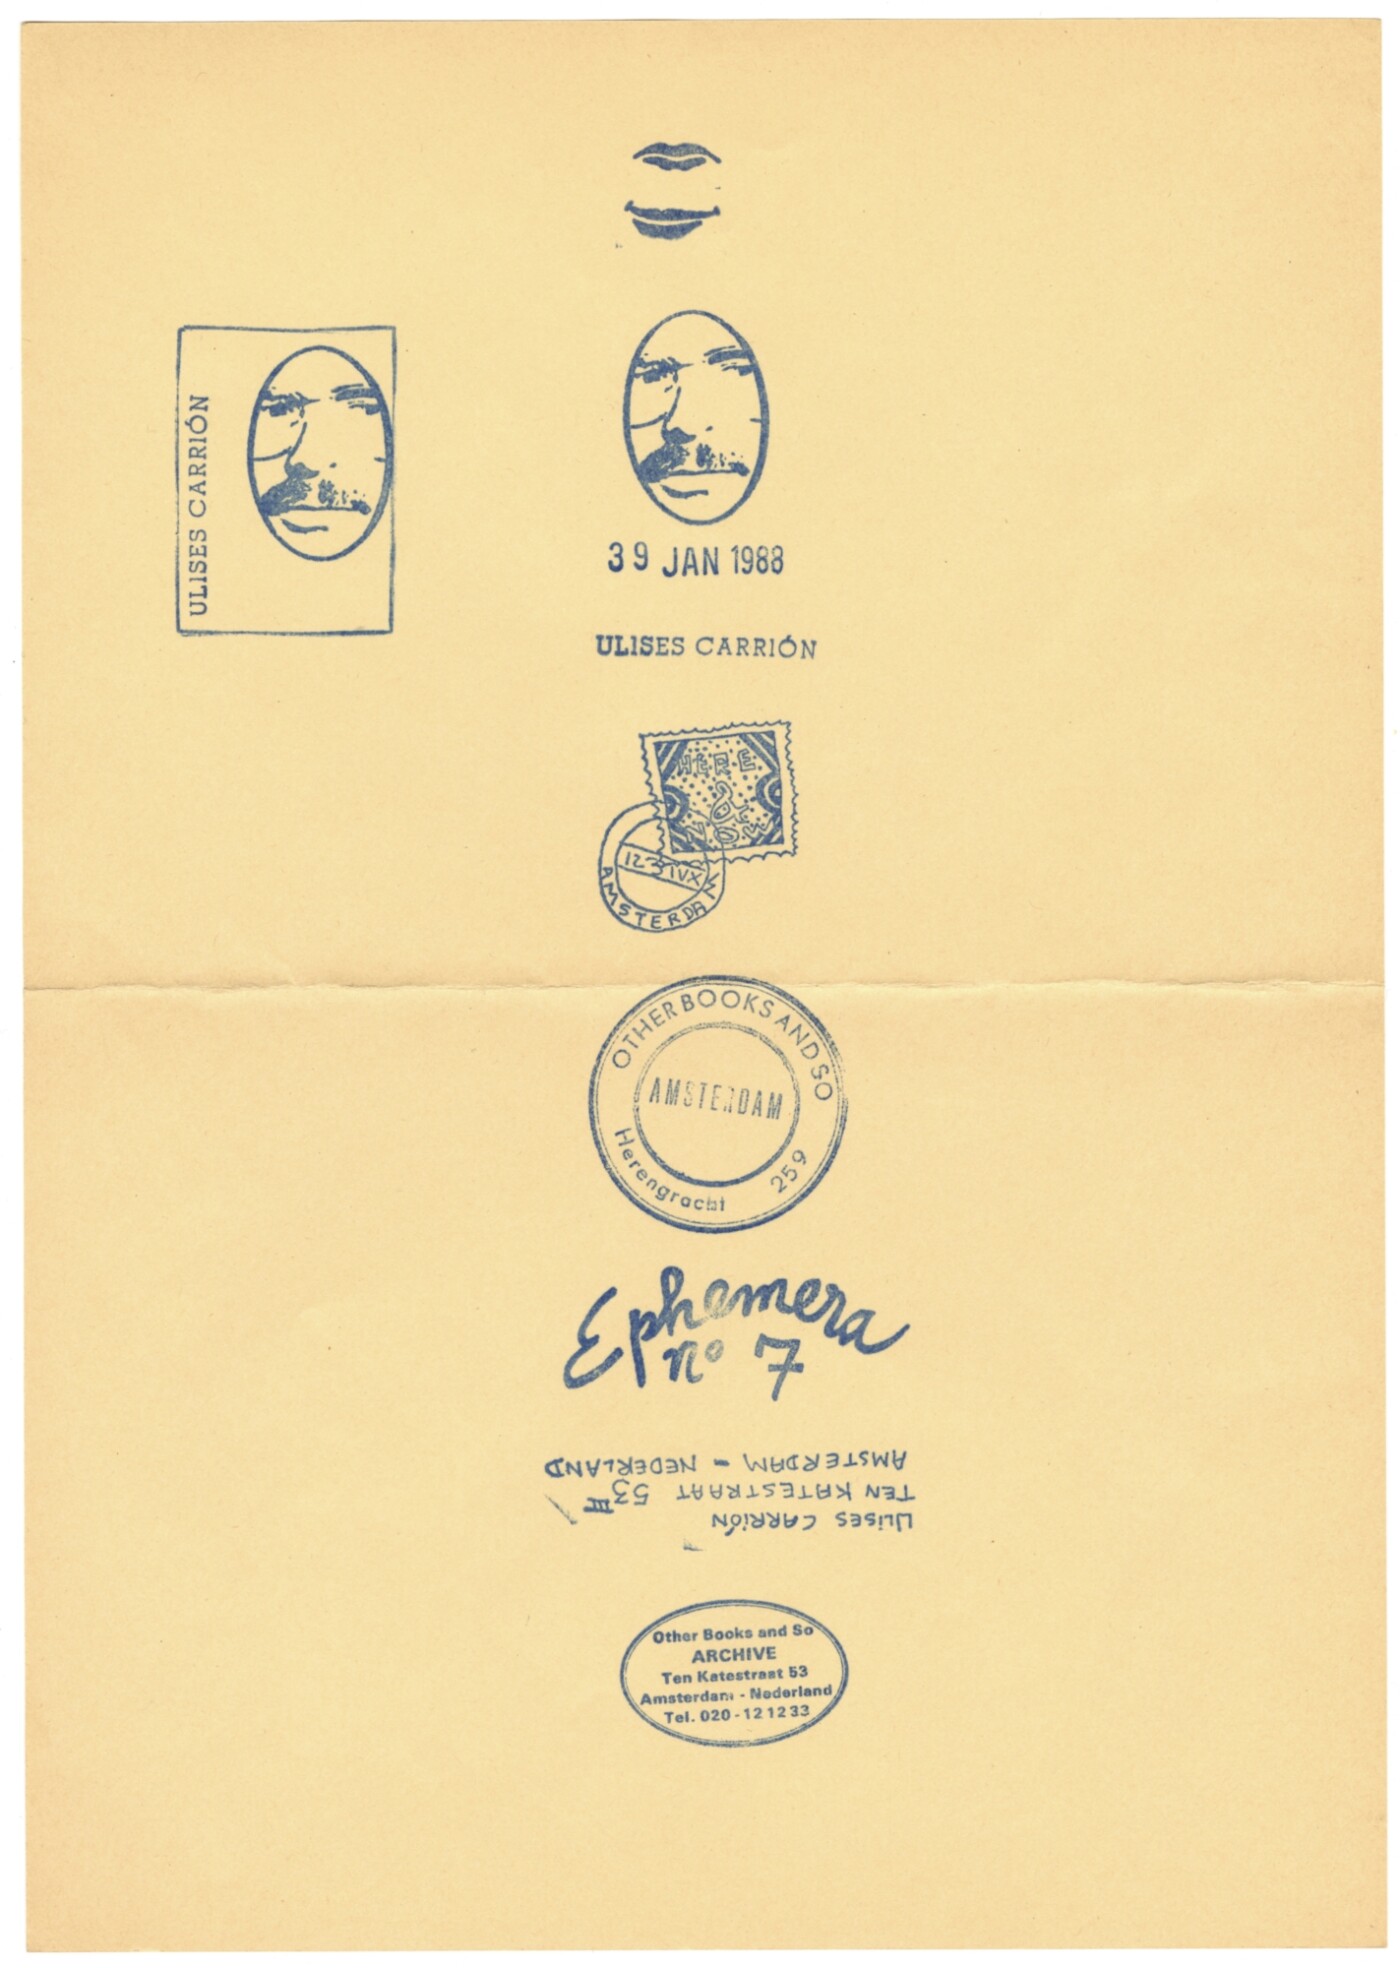 Twelve rubber stamps printed with blue ink lie in an uneven column on a plain piece of paper yellowed with age. The stamps include, from top to bottom, two pairs of lips; the outline of a rectangle containing the artist’s name, Ulises Carrión, and an oval border containing a face with eyeglasses and a mustache; the same oval border with a face to its right; the date “39 Jan 1968;” a hand-drawn postage stamp with the postmark “123IVX, Amsterdam;” a postmark reading “Other Books and So: Amsterdam, Herengracht 259;” cursive letters reading “Ephemera nº7;” the handwritten address “Ulises Carrión. Ten Katestraat 53 III, Amsterdam—Netherlands,” printed upside down; and another postmark reading “Other Books and So. ARCHIVE. Ten Katestraat 53, Amsterdam—Nederland. Tel. 020-12 12 33.”